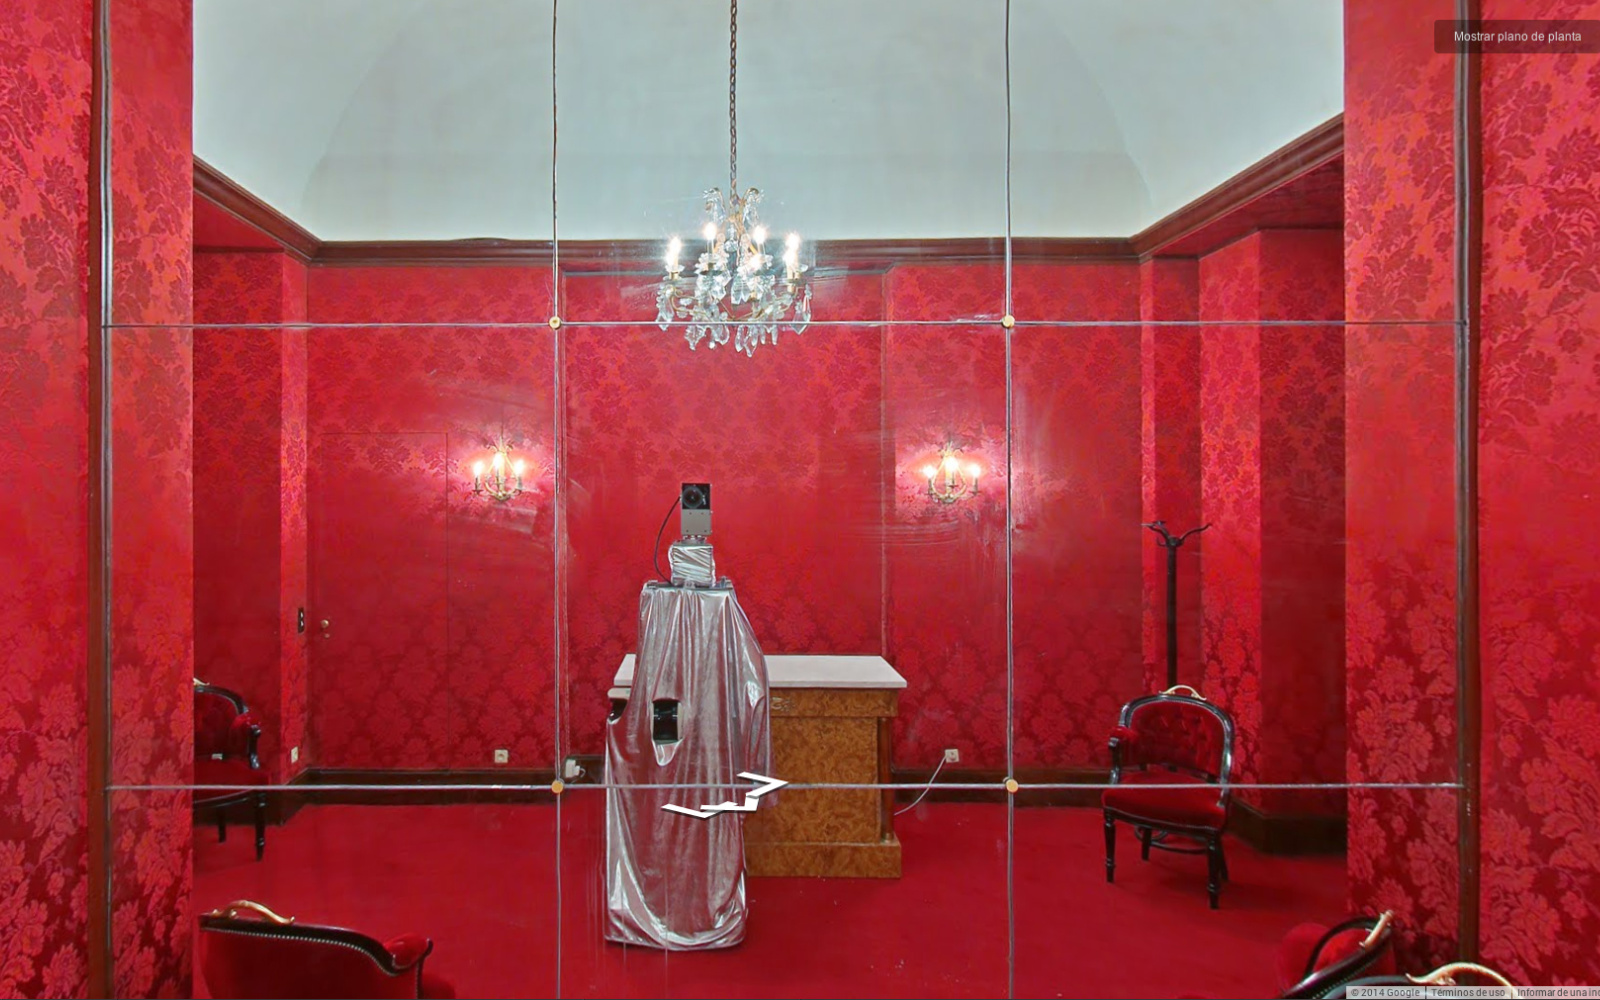 Red room with big mirror and a camera taking a "selfie" in it 